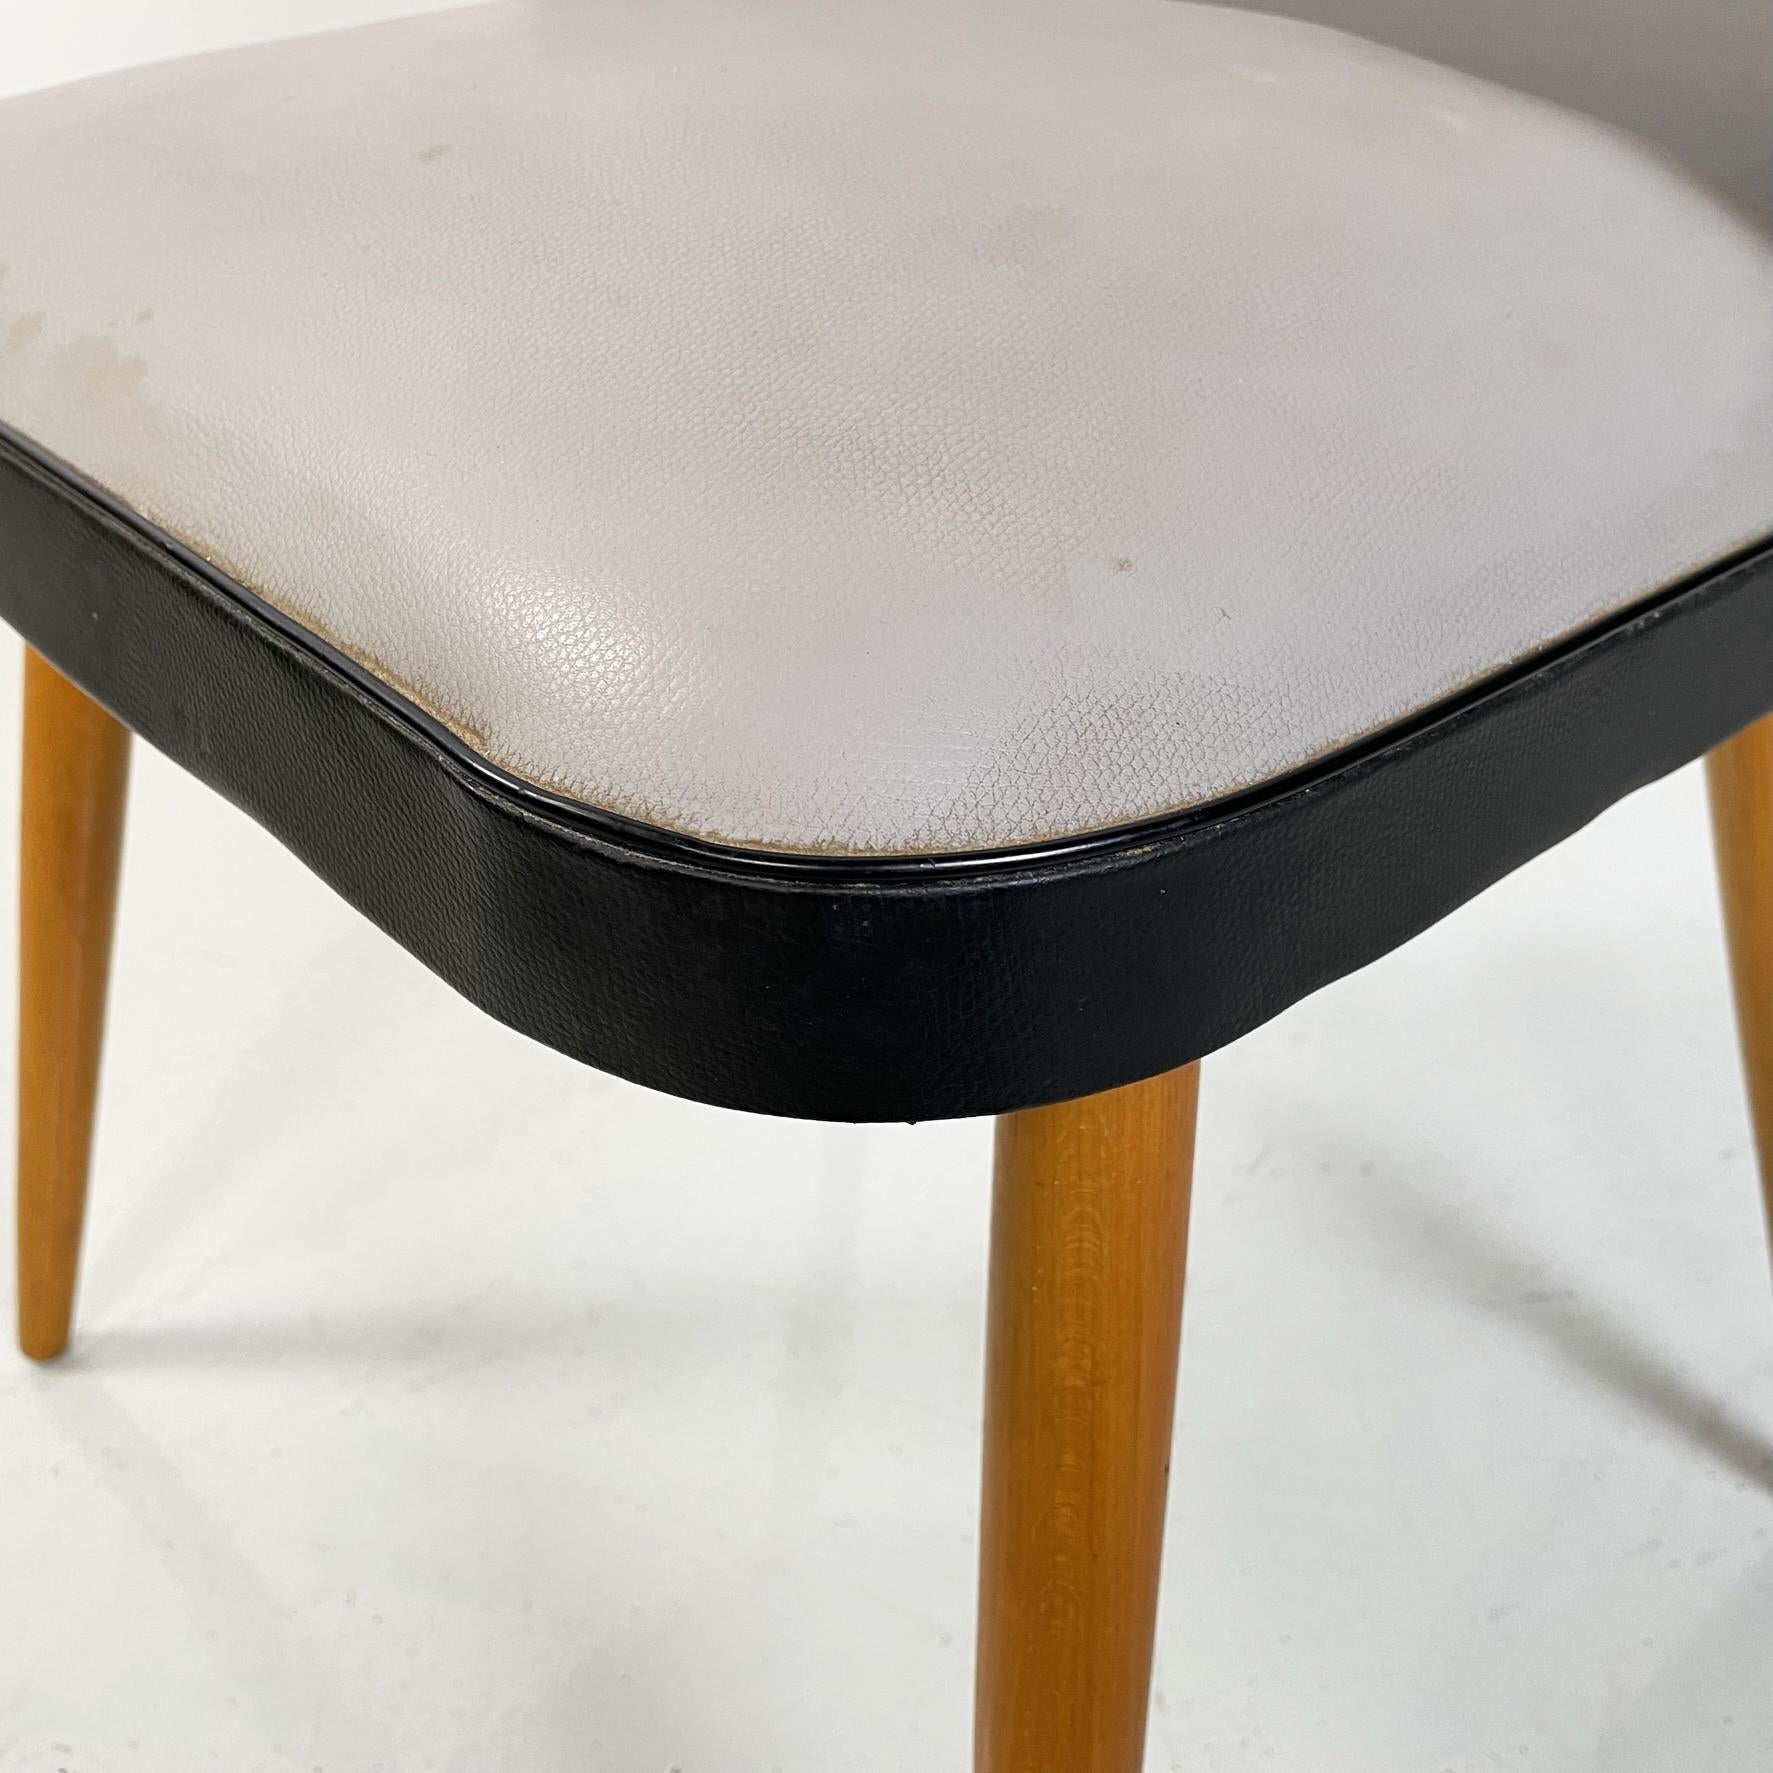 Italian modern Chairs in black and gray leather and wood, 1980s For Sale 4